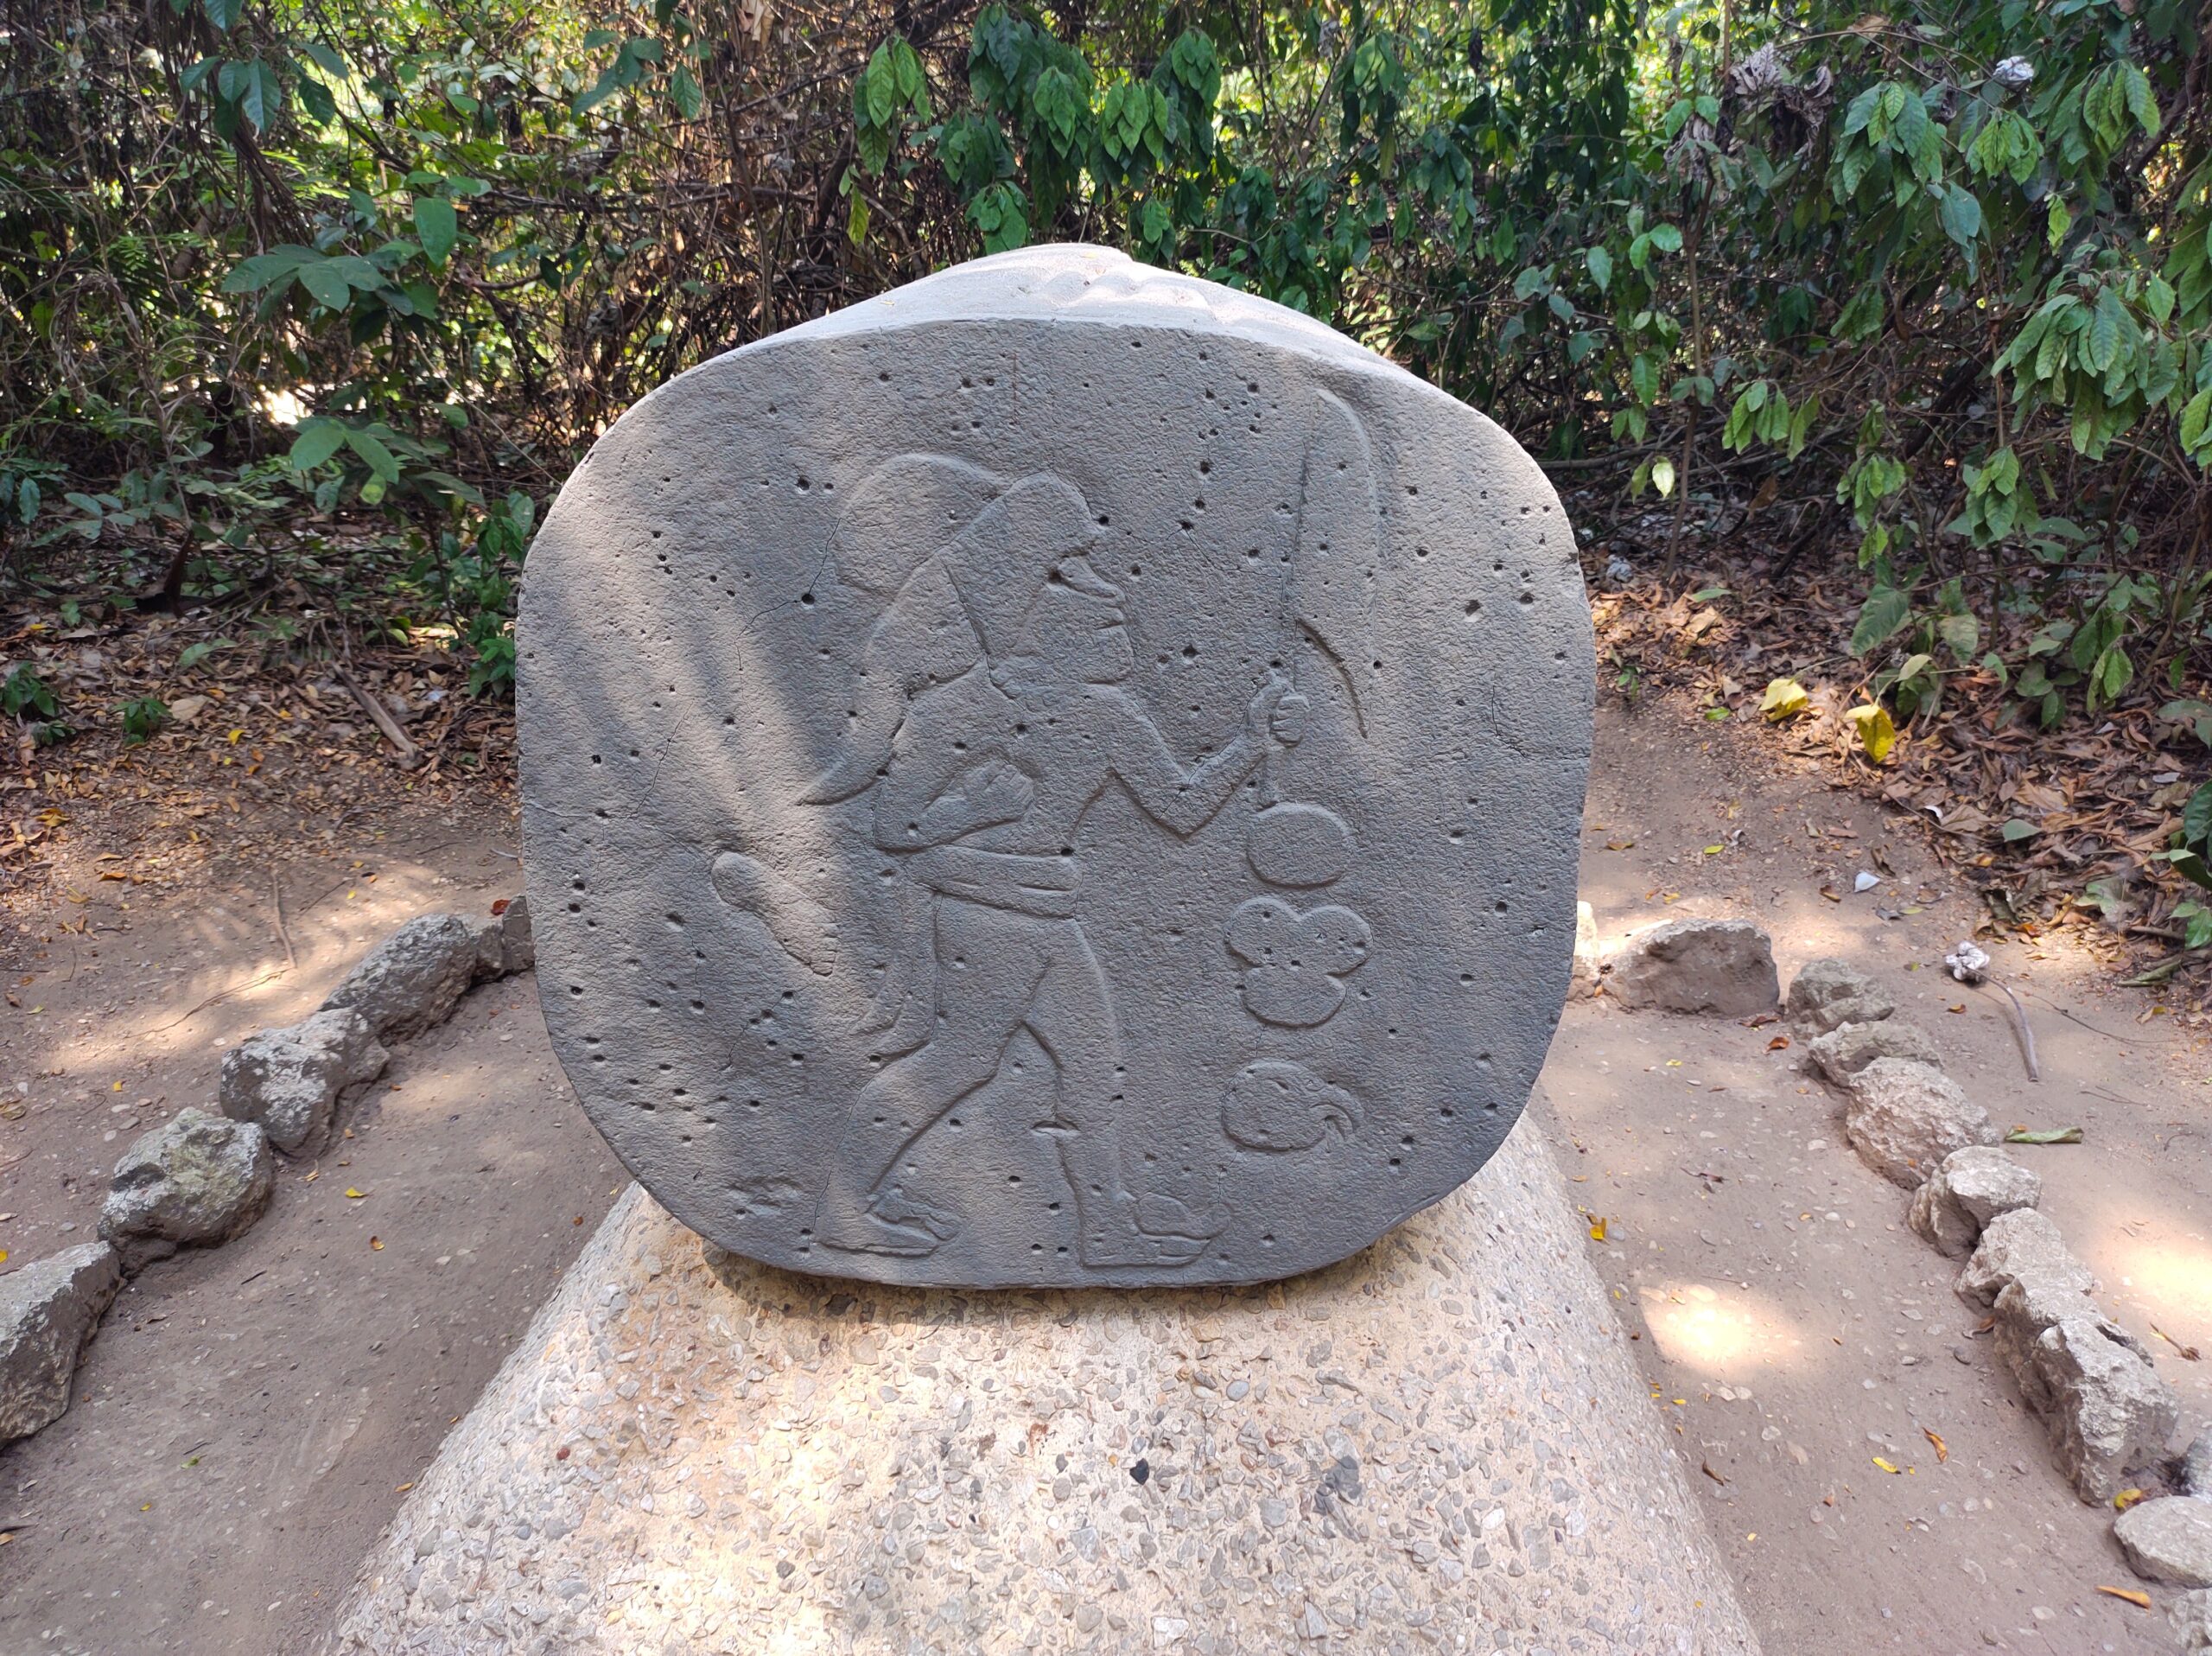 La Venta is an extremely ancient site and pyramid located in Mexico.
pictured: a stone with Mesoamerican markings from the La Venta site 